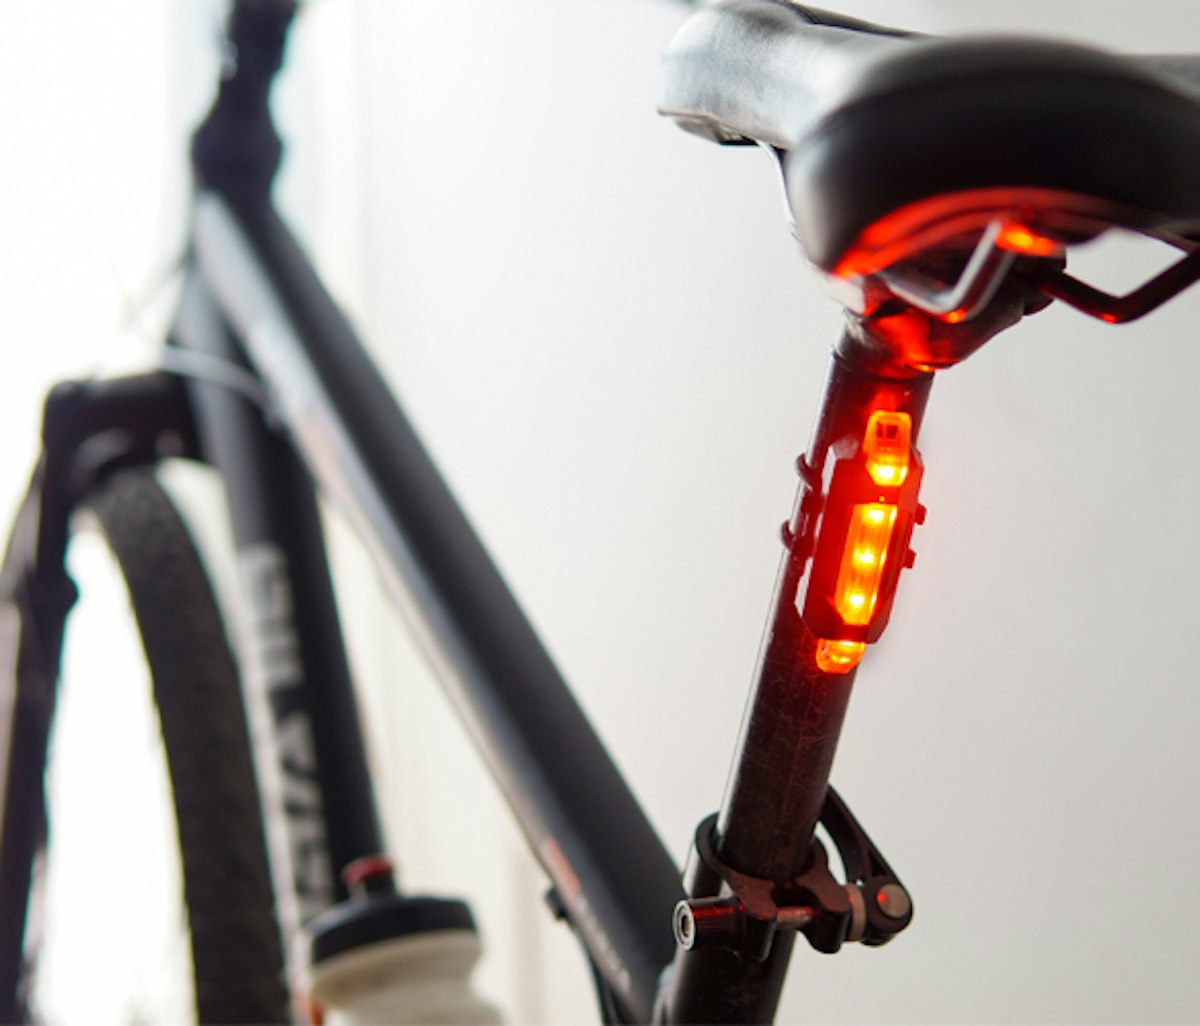 Rear view of a bicycle showing a seat and illuminated red tail light.